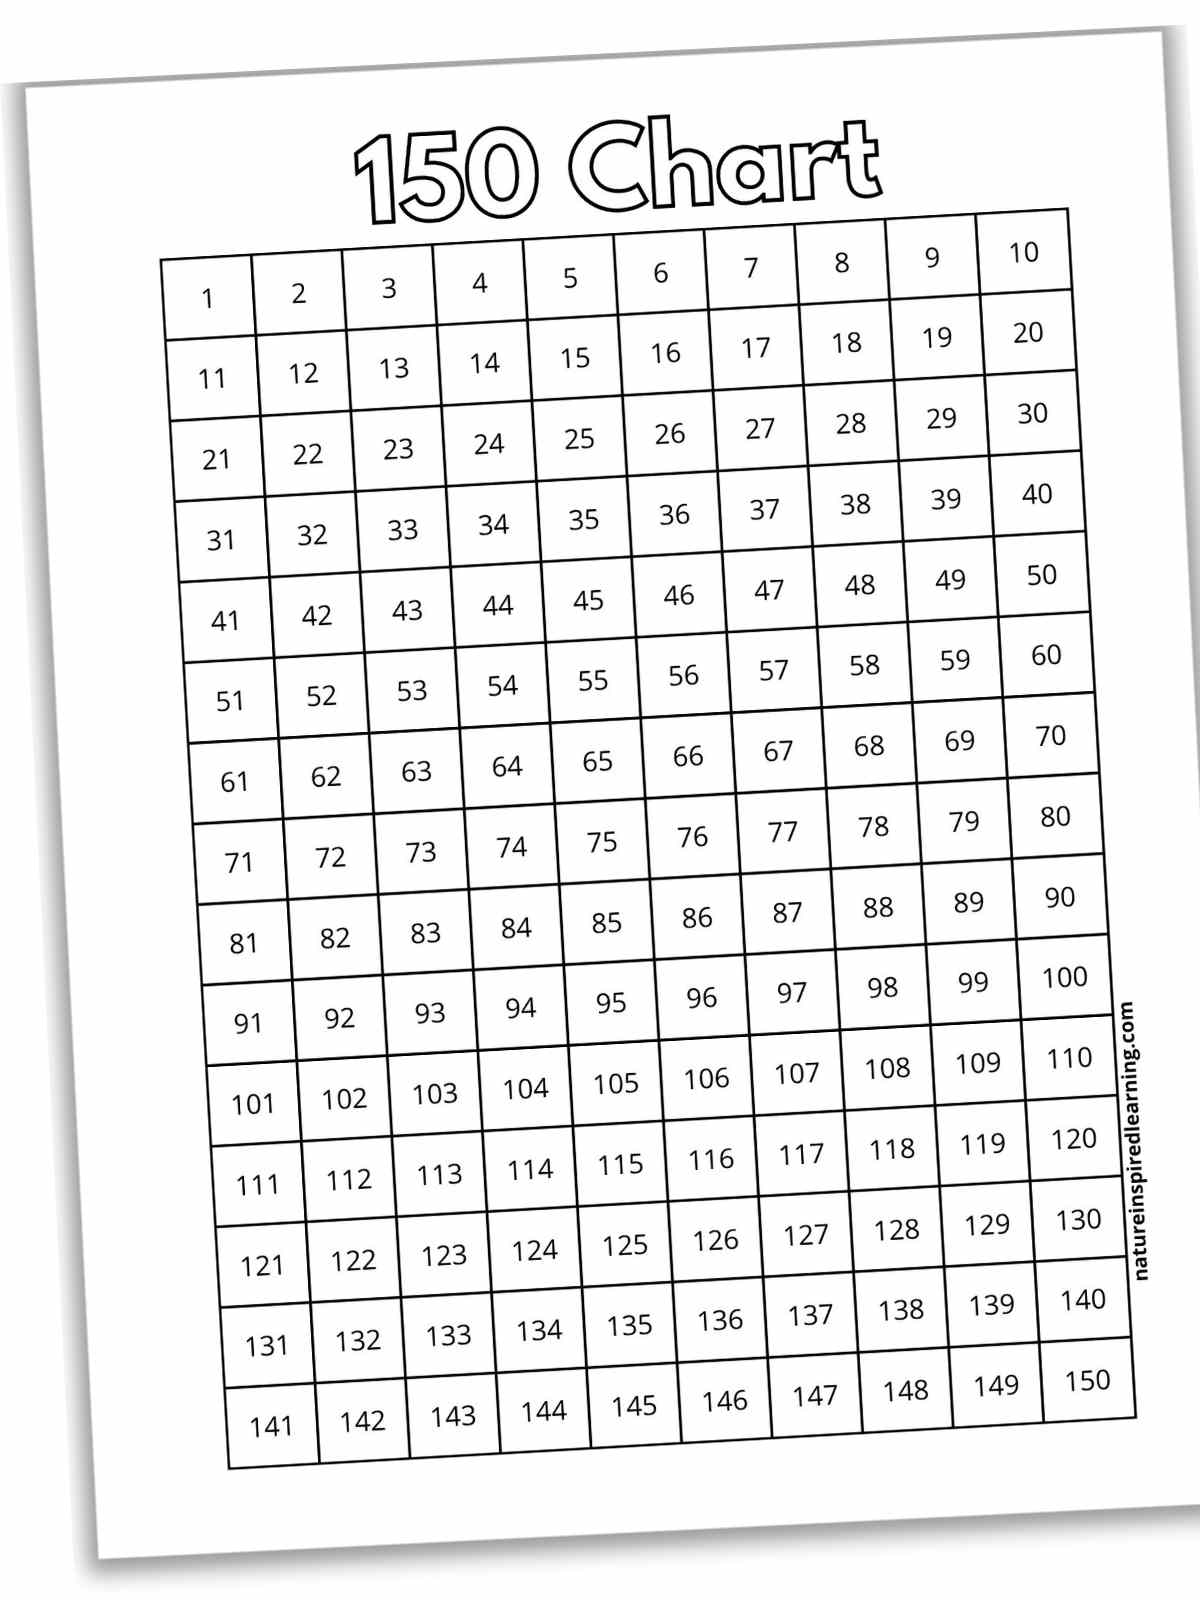 horizontal black and white chart with a large grid with numbers inside each box with a title in outline form across the top